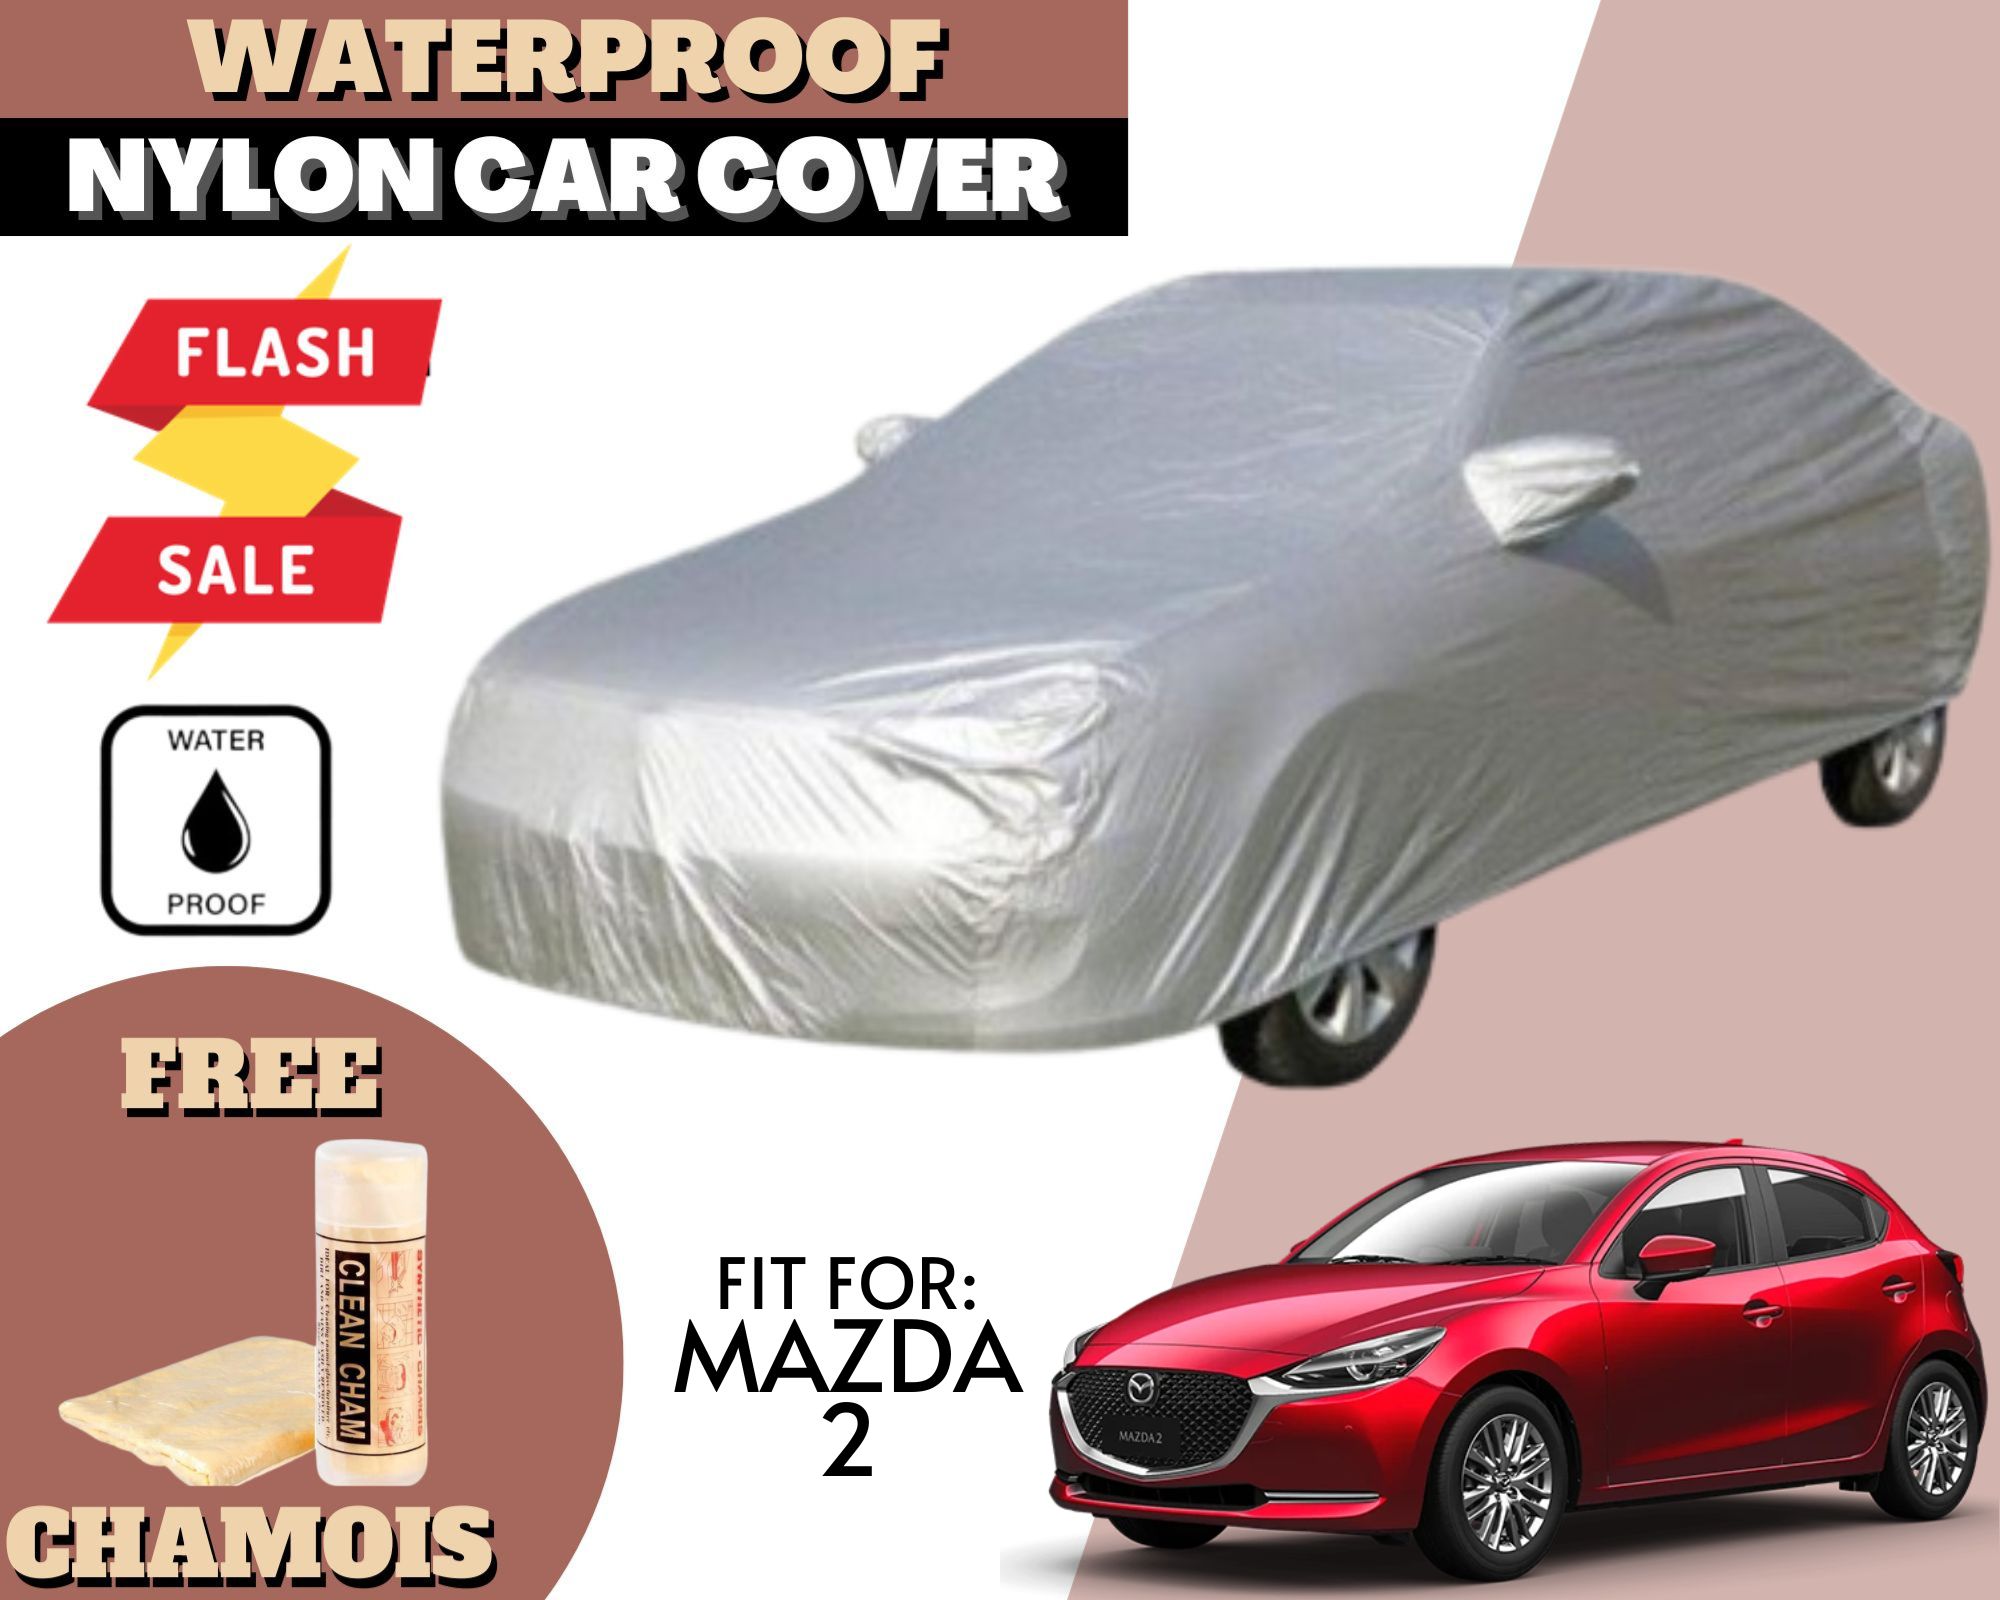 Car Cover, MAZDA 2 - Waterproof & With Free Chamois Towel